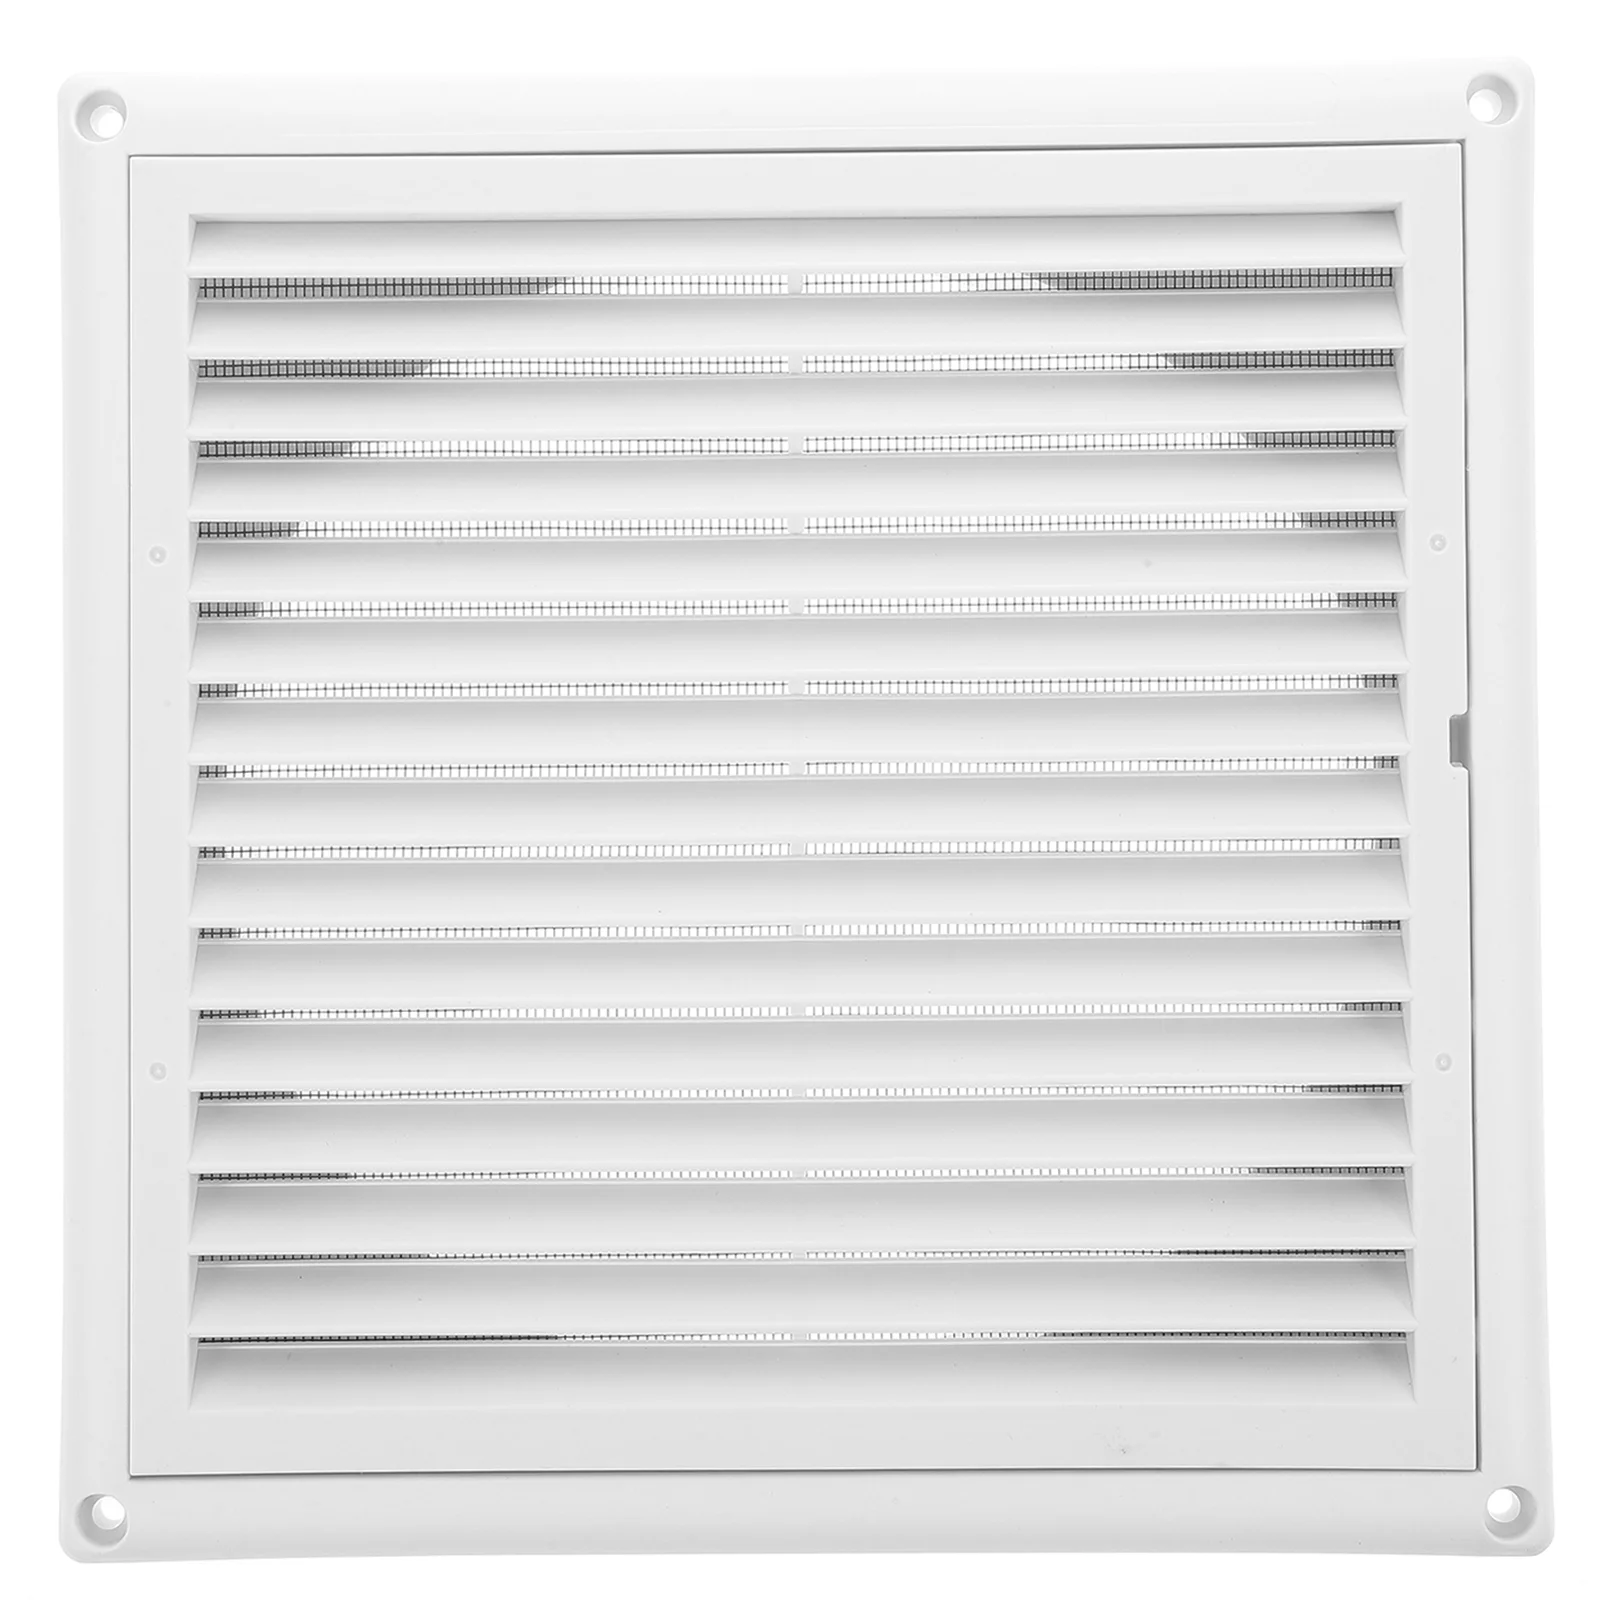 

Air Conditioner Return Air Grille Ventilation Grille Wall Ceiling Floor Exhaust Vent